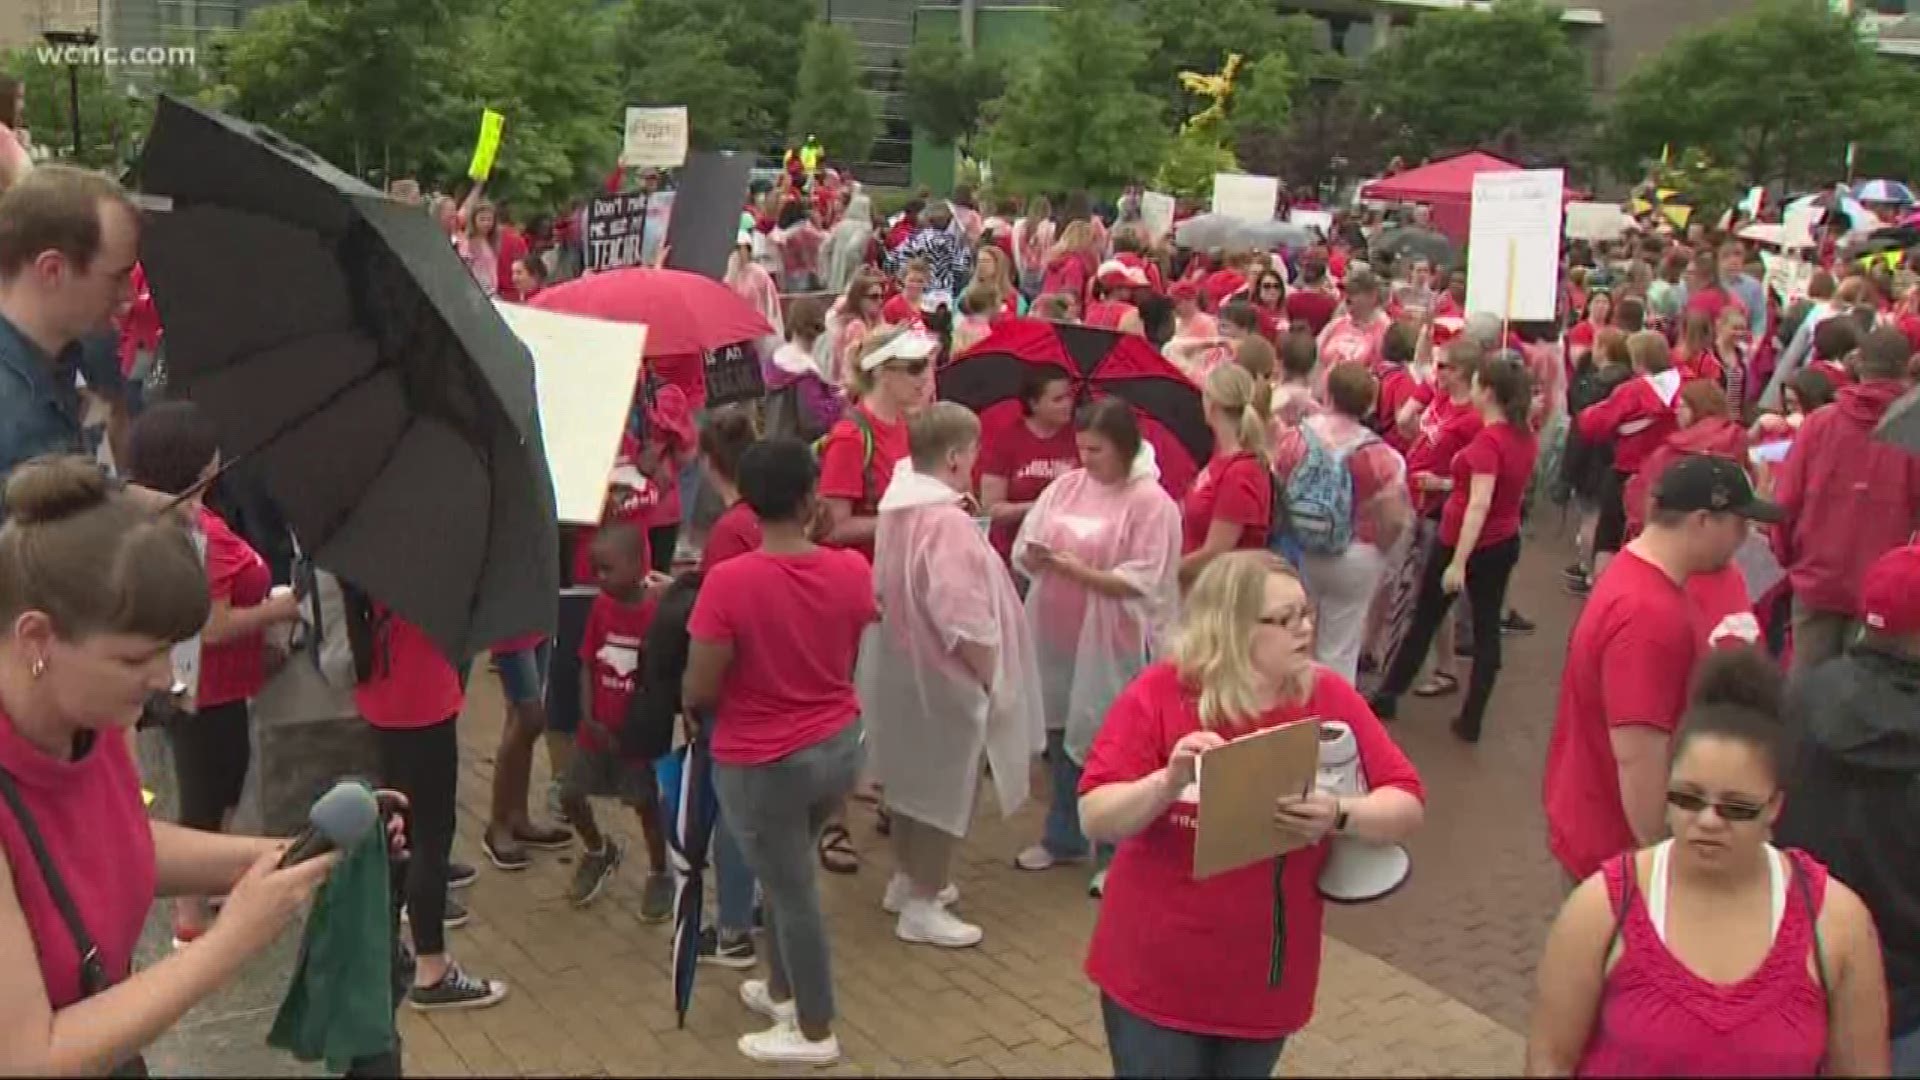 Raleigh wasn't the only city in North Carolina where teachers gathered for better working conditions and an increase in pay.